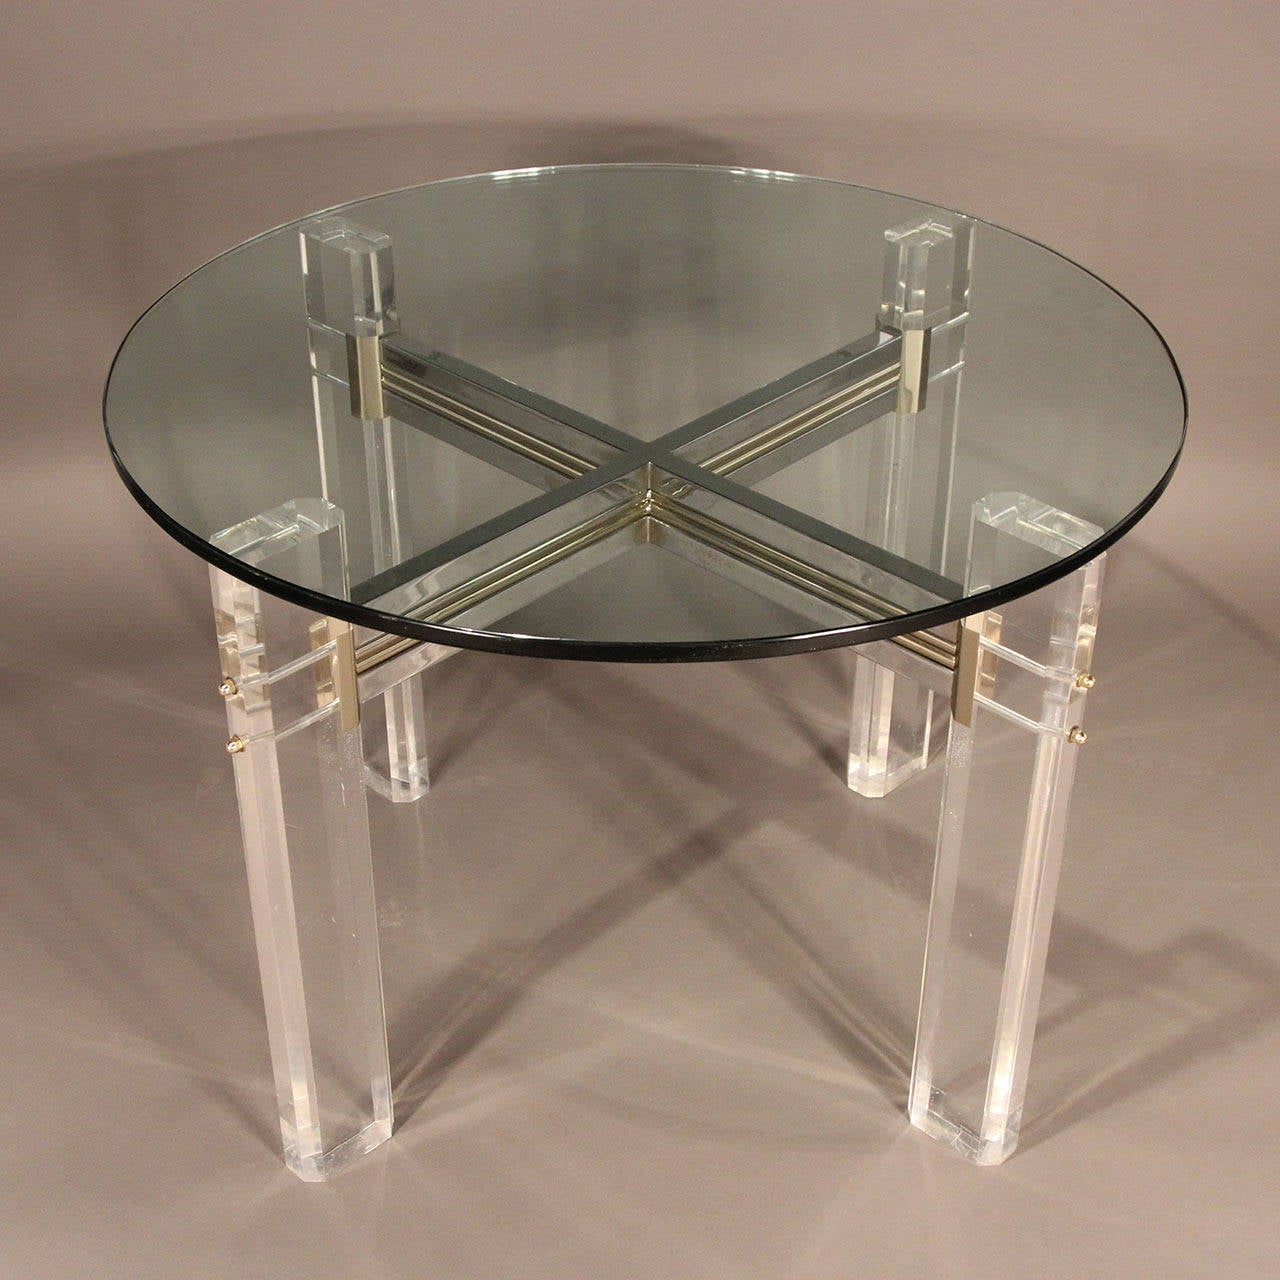 Charles Hollis Jones Lucite, Brass and Chrome Dining Table 1